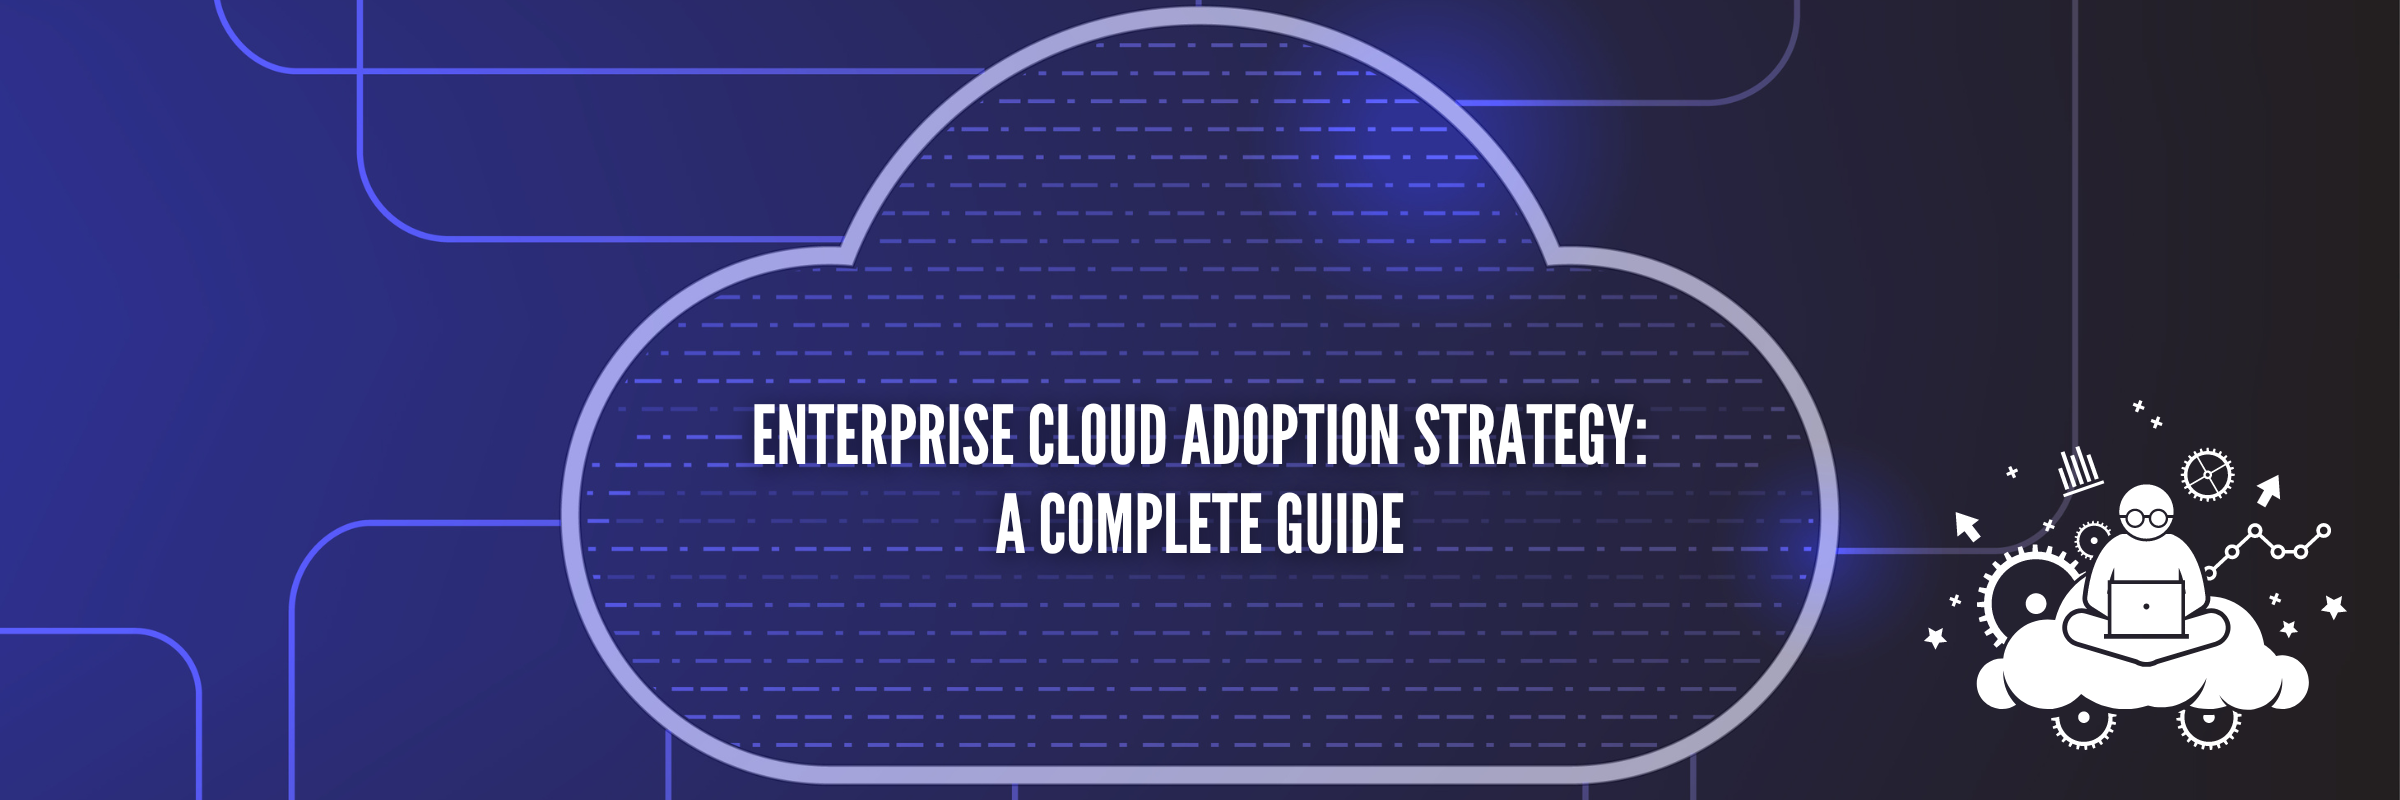 Enterprise Cloud Adoption Strategy: The Complete Guide